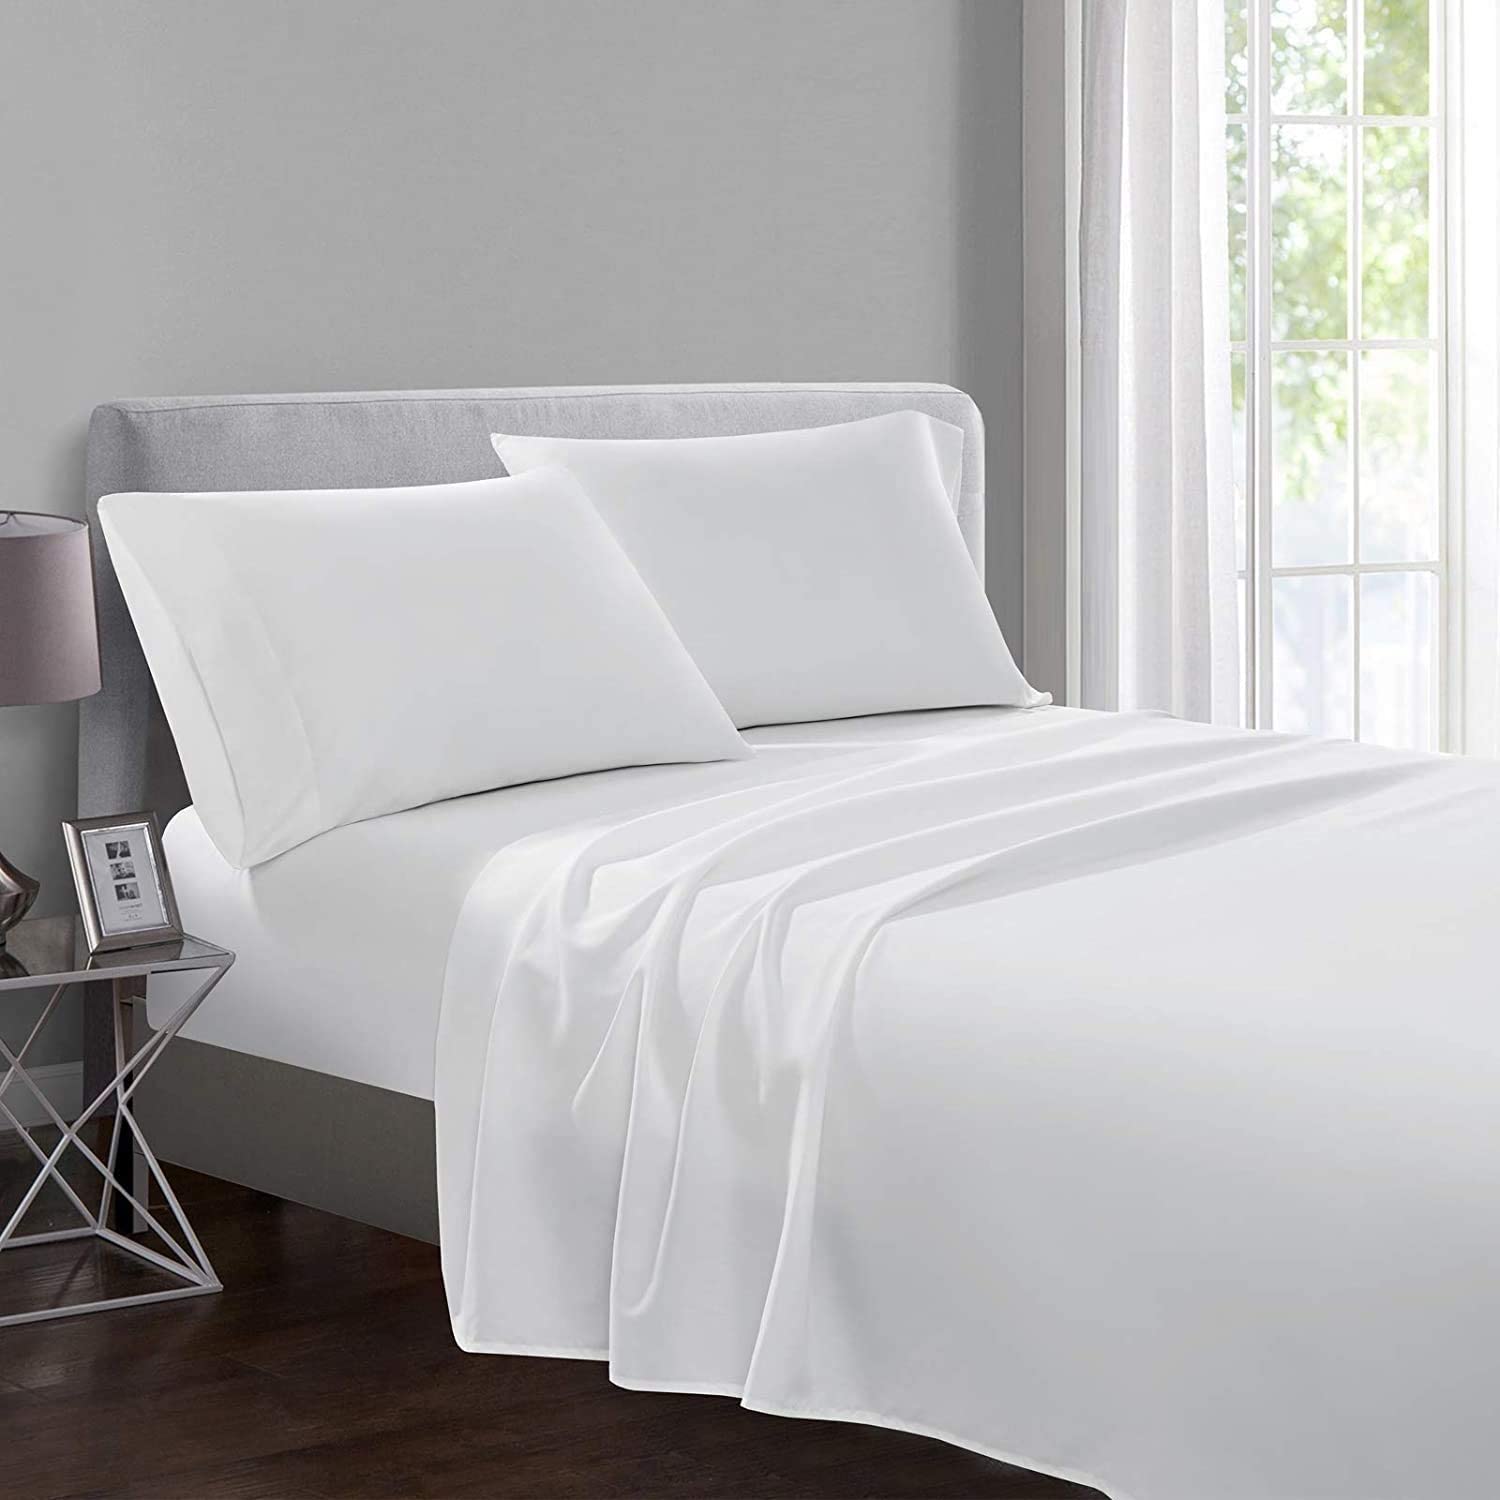 Top Sheet For Bed Discount Sale, Save 61% | jlcatj.gob.mx